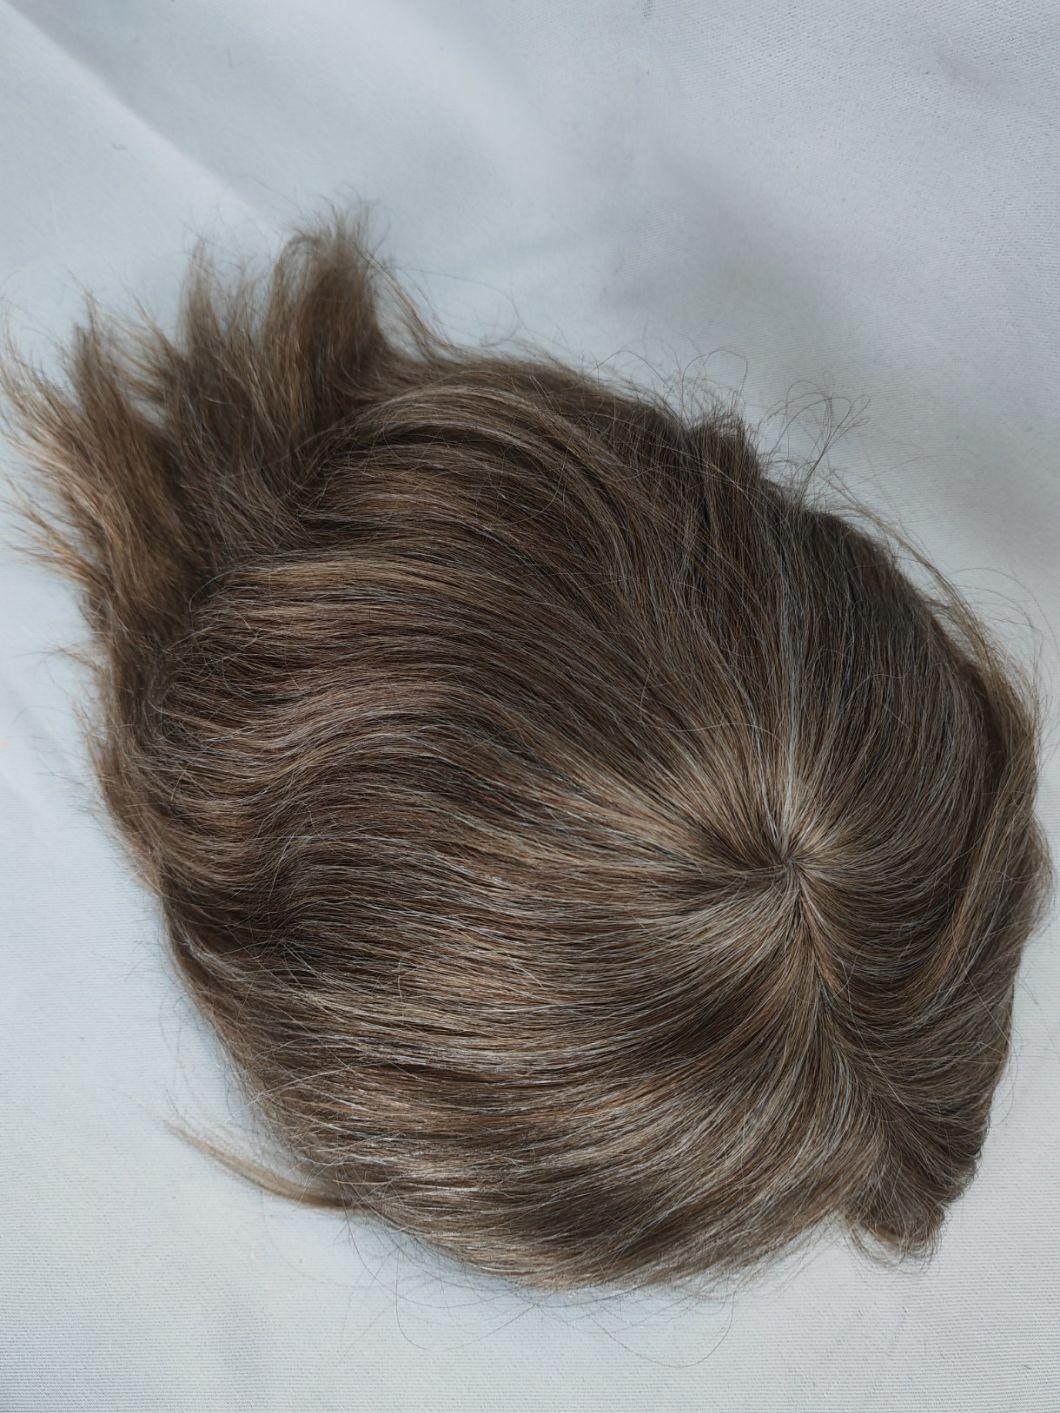 2022 Most Popular Custom Made Clear PU Base Injection Toupee Made of Remy Human Hair